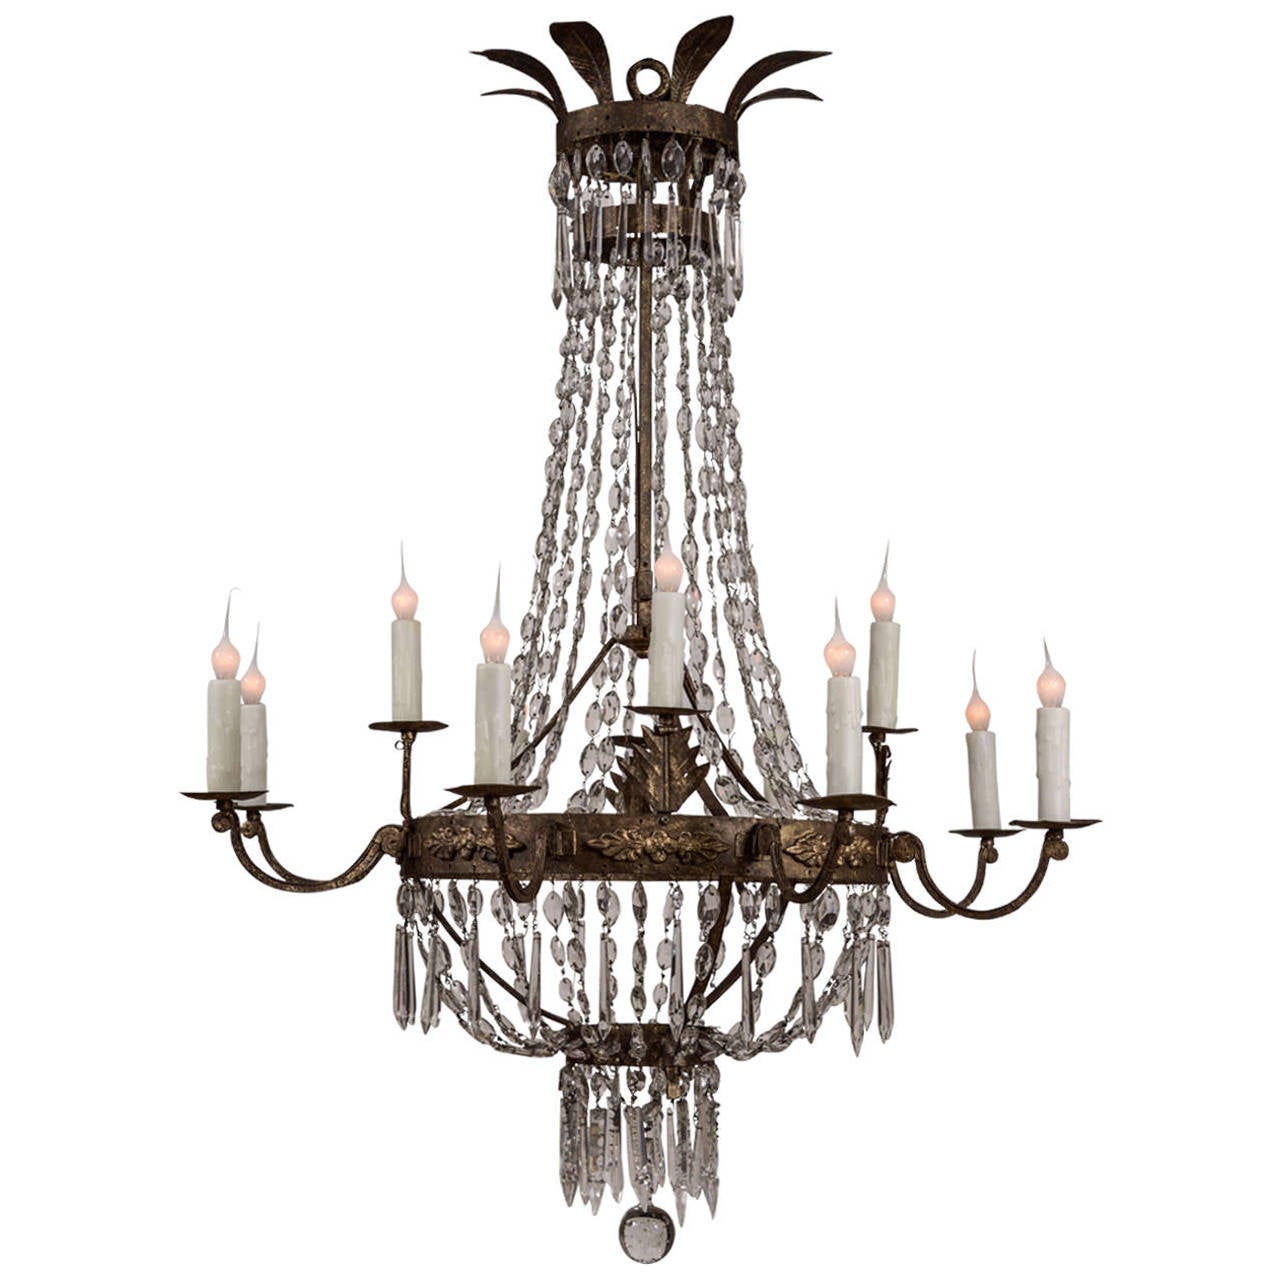 Large 19th Century Italian Gilt Iron and Crystal Chandelier